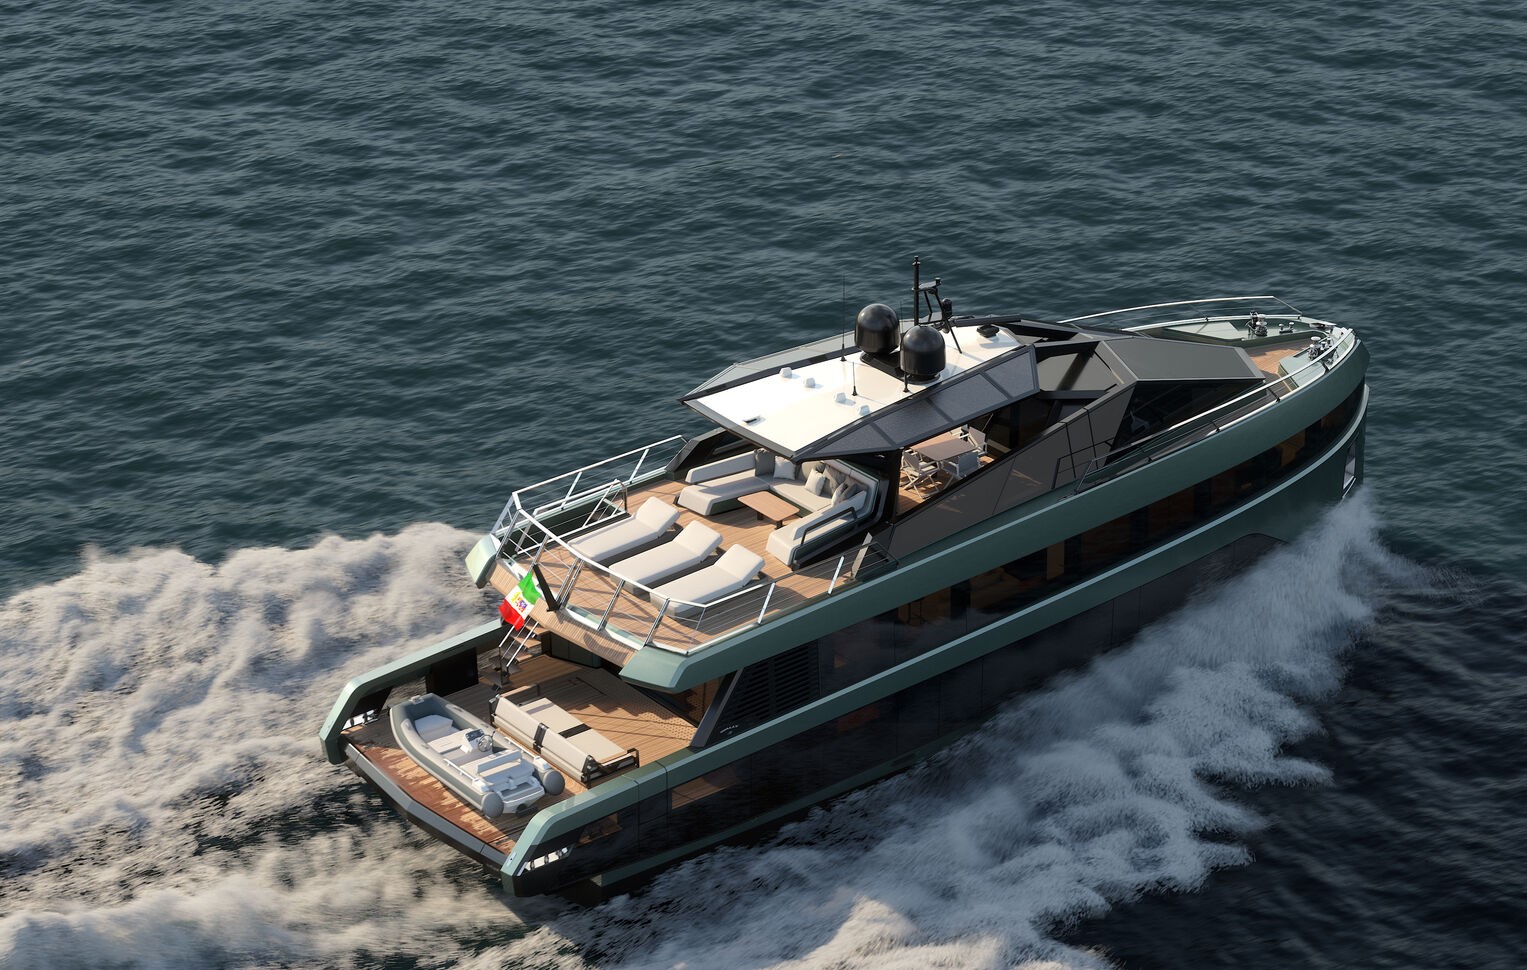 The Venice Boat Show 2024, from May 29 to June 2 at the Venetian Arsenale, features 270 exhibitors, 300 boats, world premieres, and a focus on environmental sustainability.